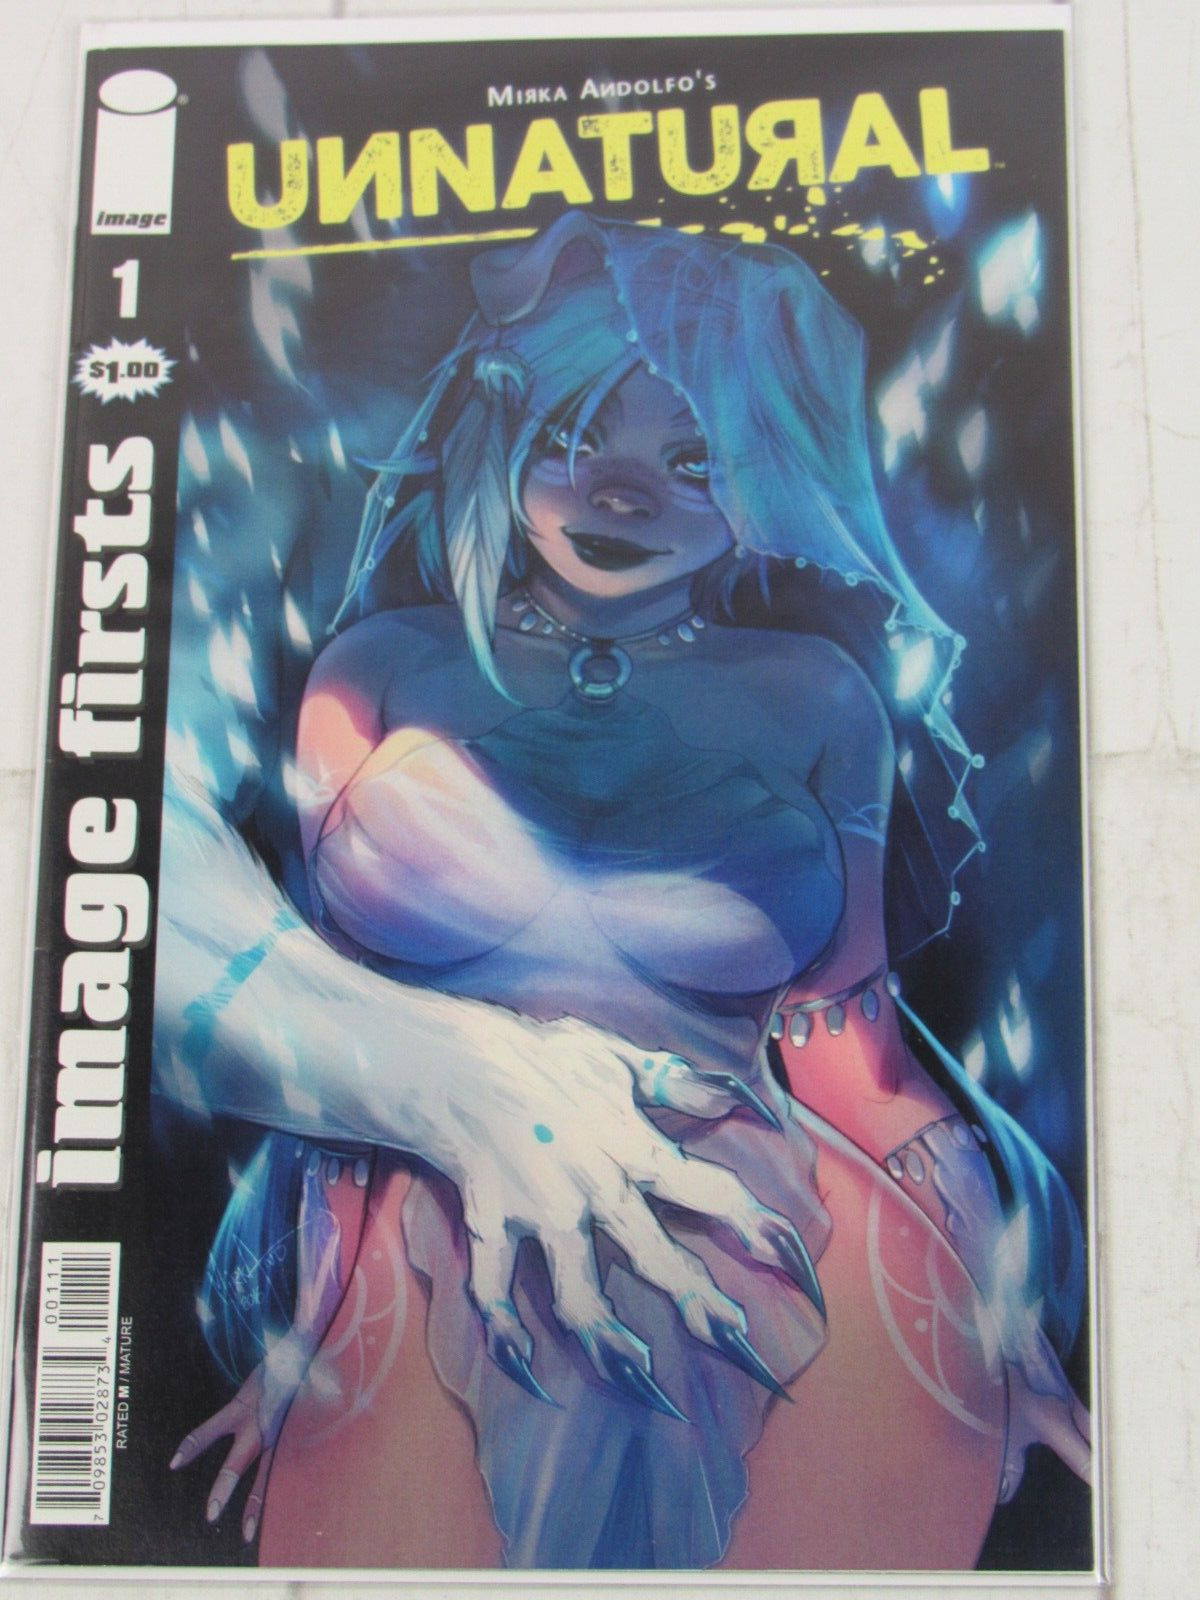 Unnatural #1image firsts Aug. 2019 Image Comics